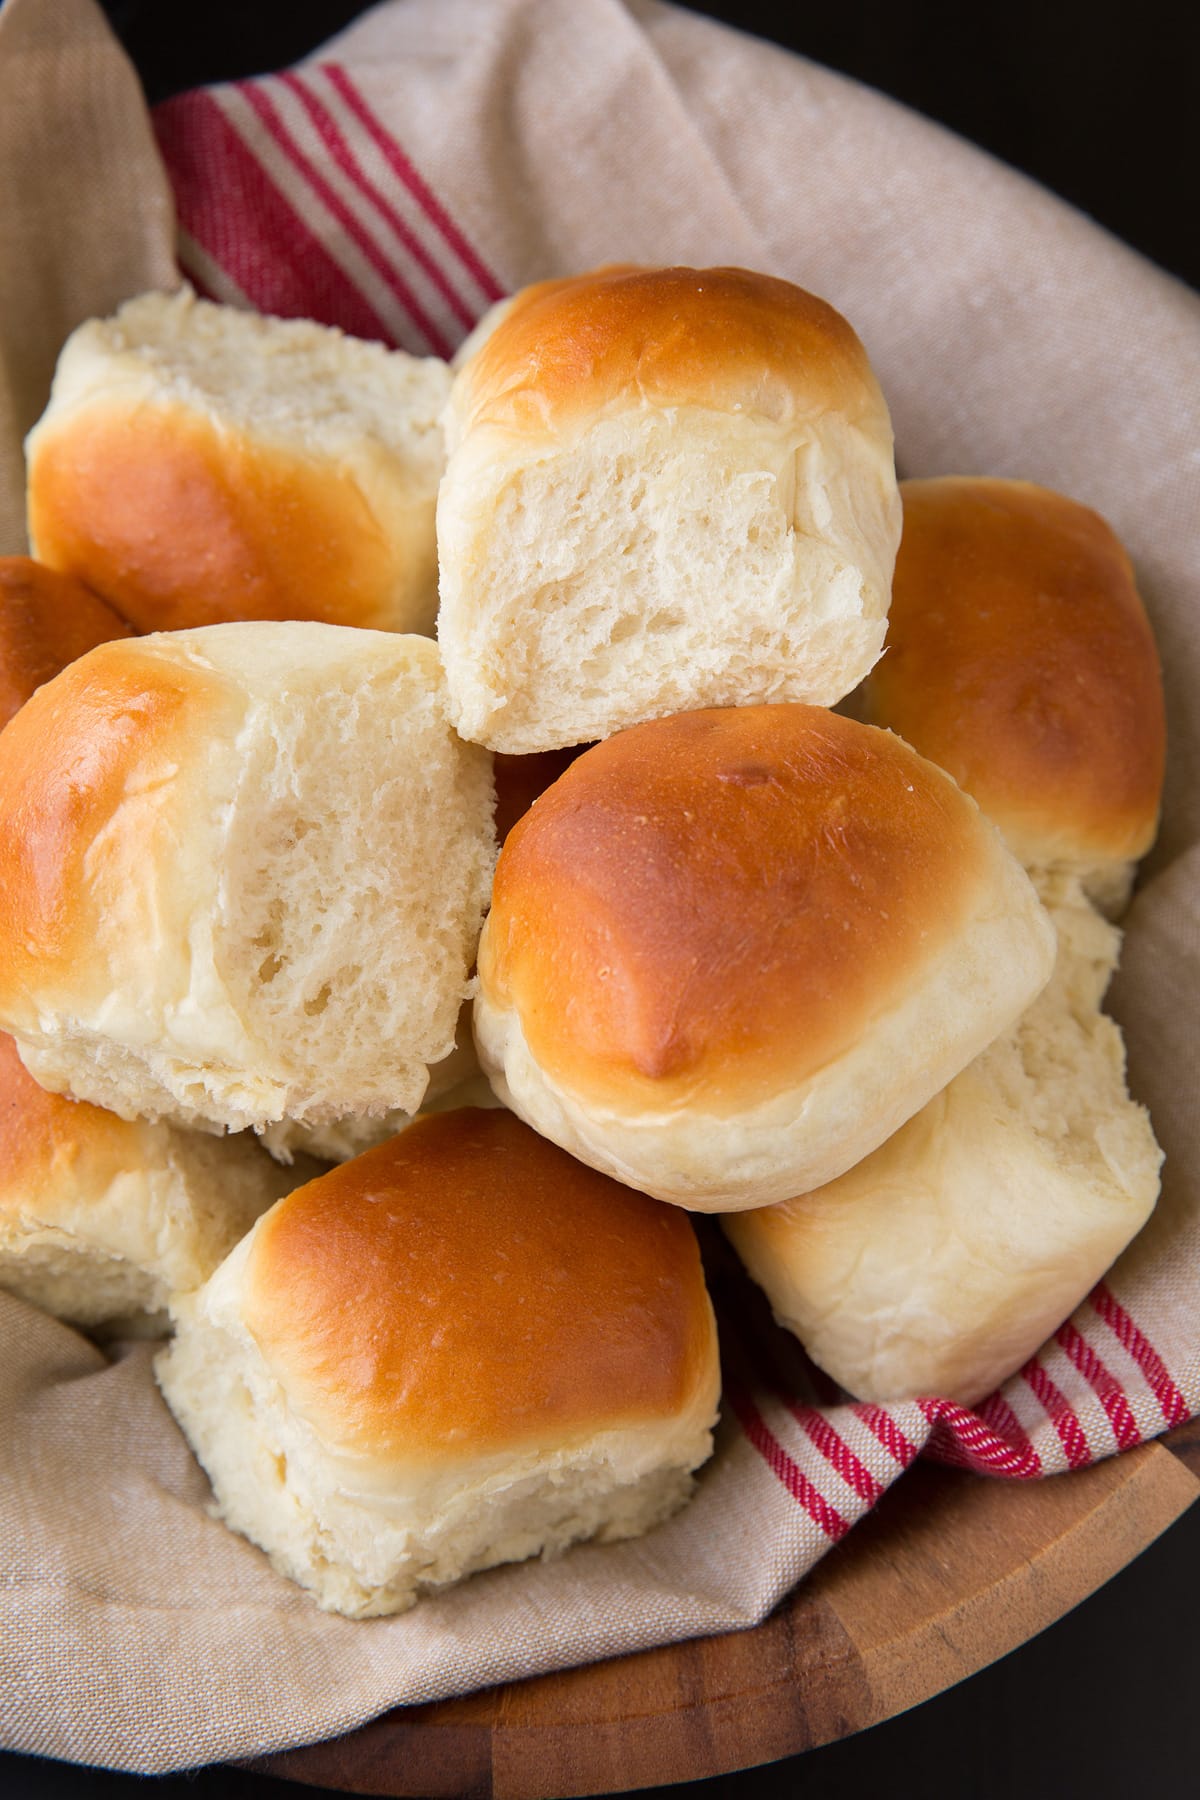 Dinner Rolls shown in a wooden bowl resting on a kitchen cloth.